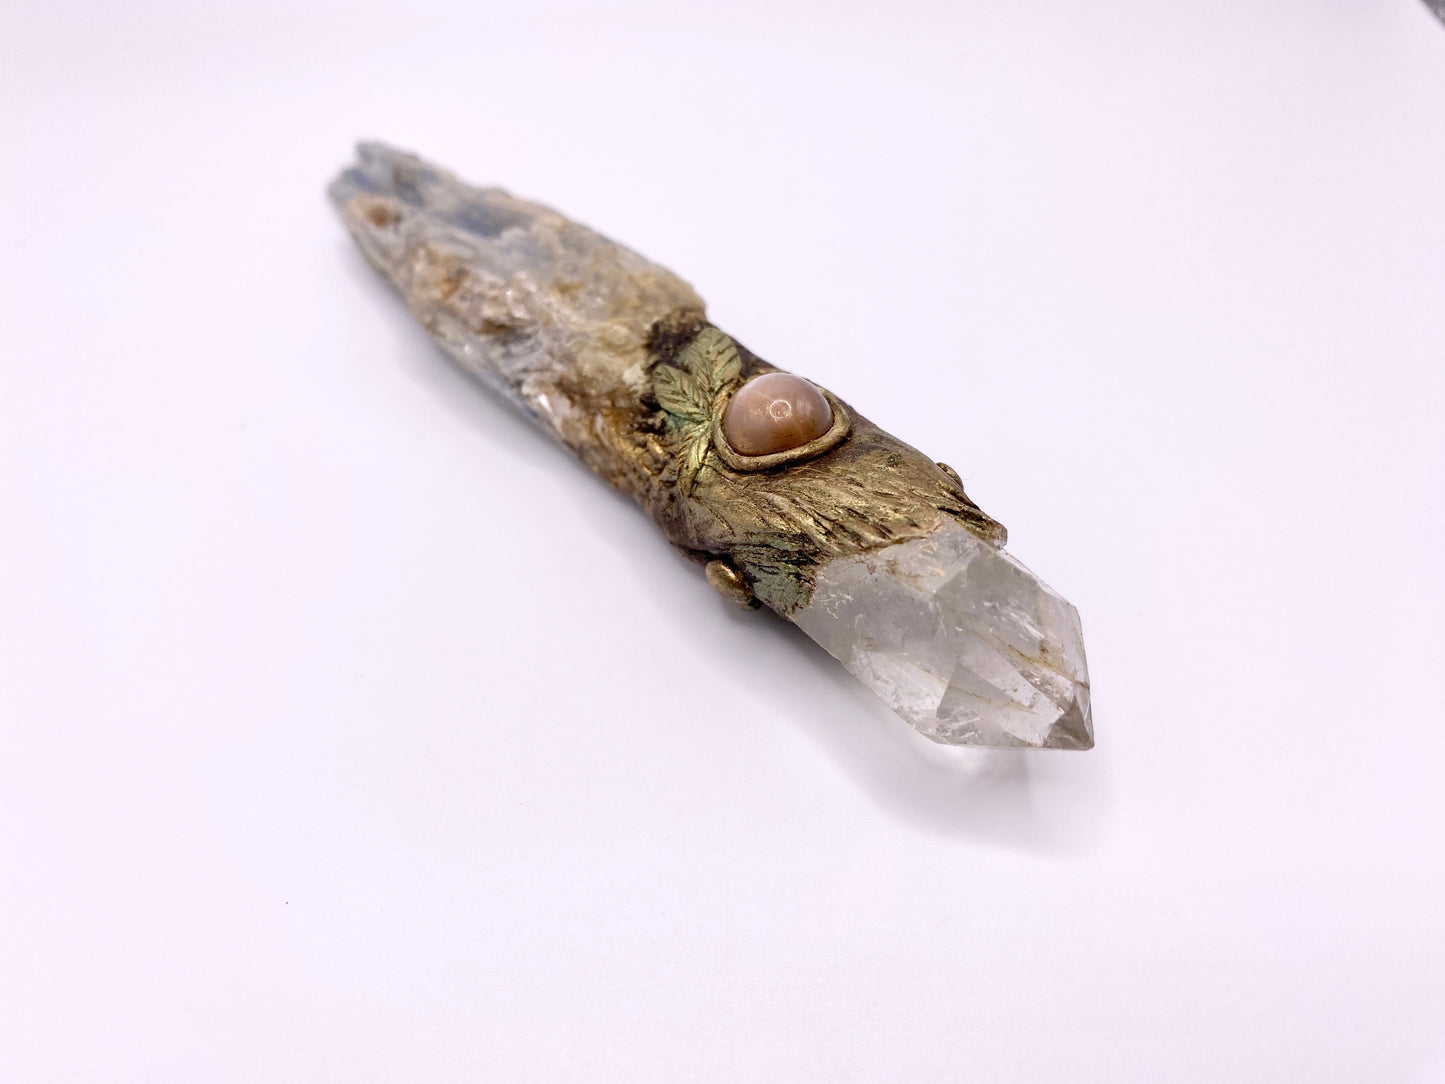 Crystal Energy Wand with Clear Quartz, Blue Kyanite and Peach Moonstones - Reversible Metaphysical Wand